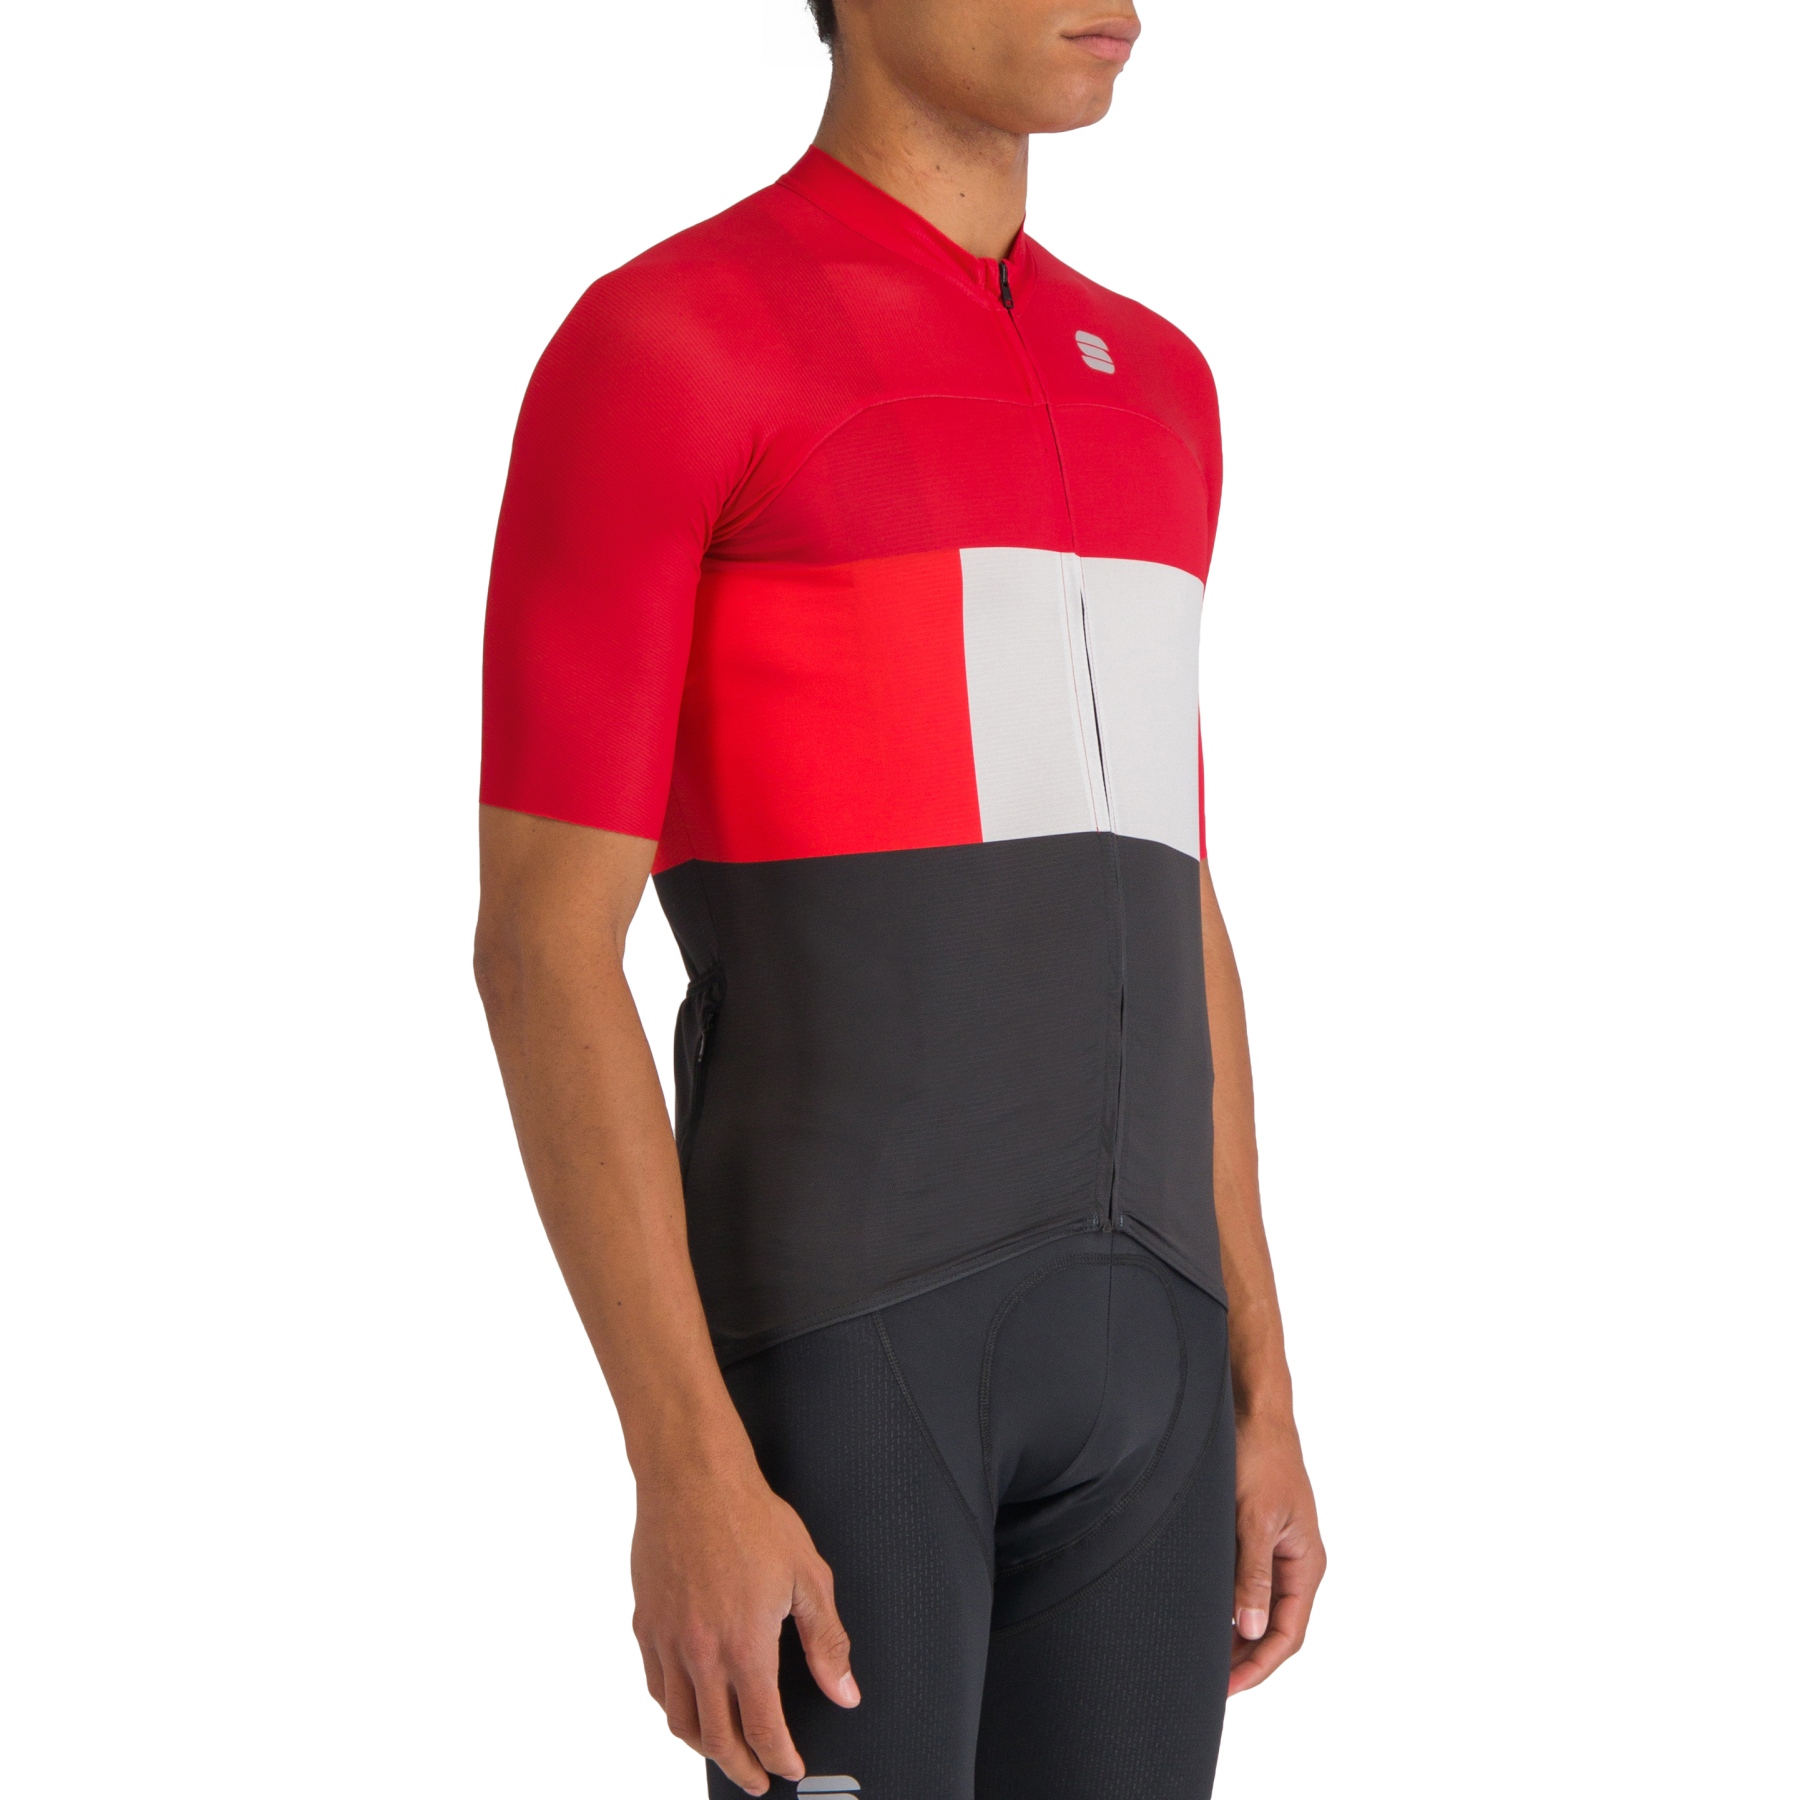 Picture of Sportful Snap Jersey Men - 638 Red Black